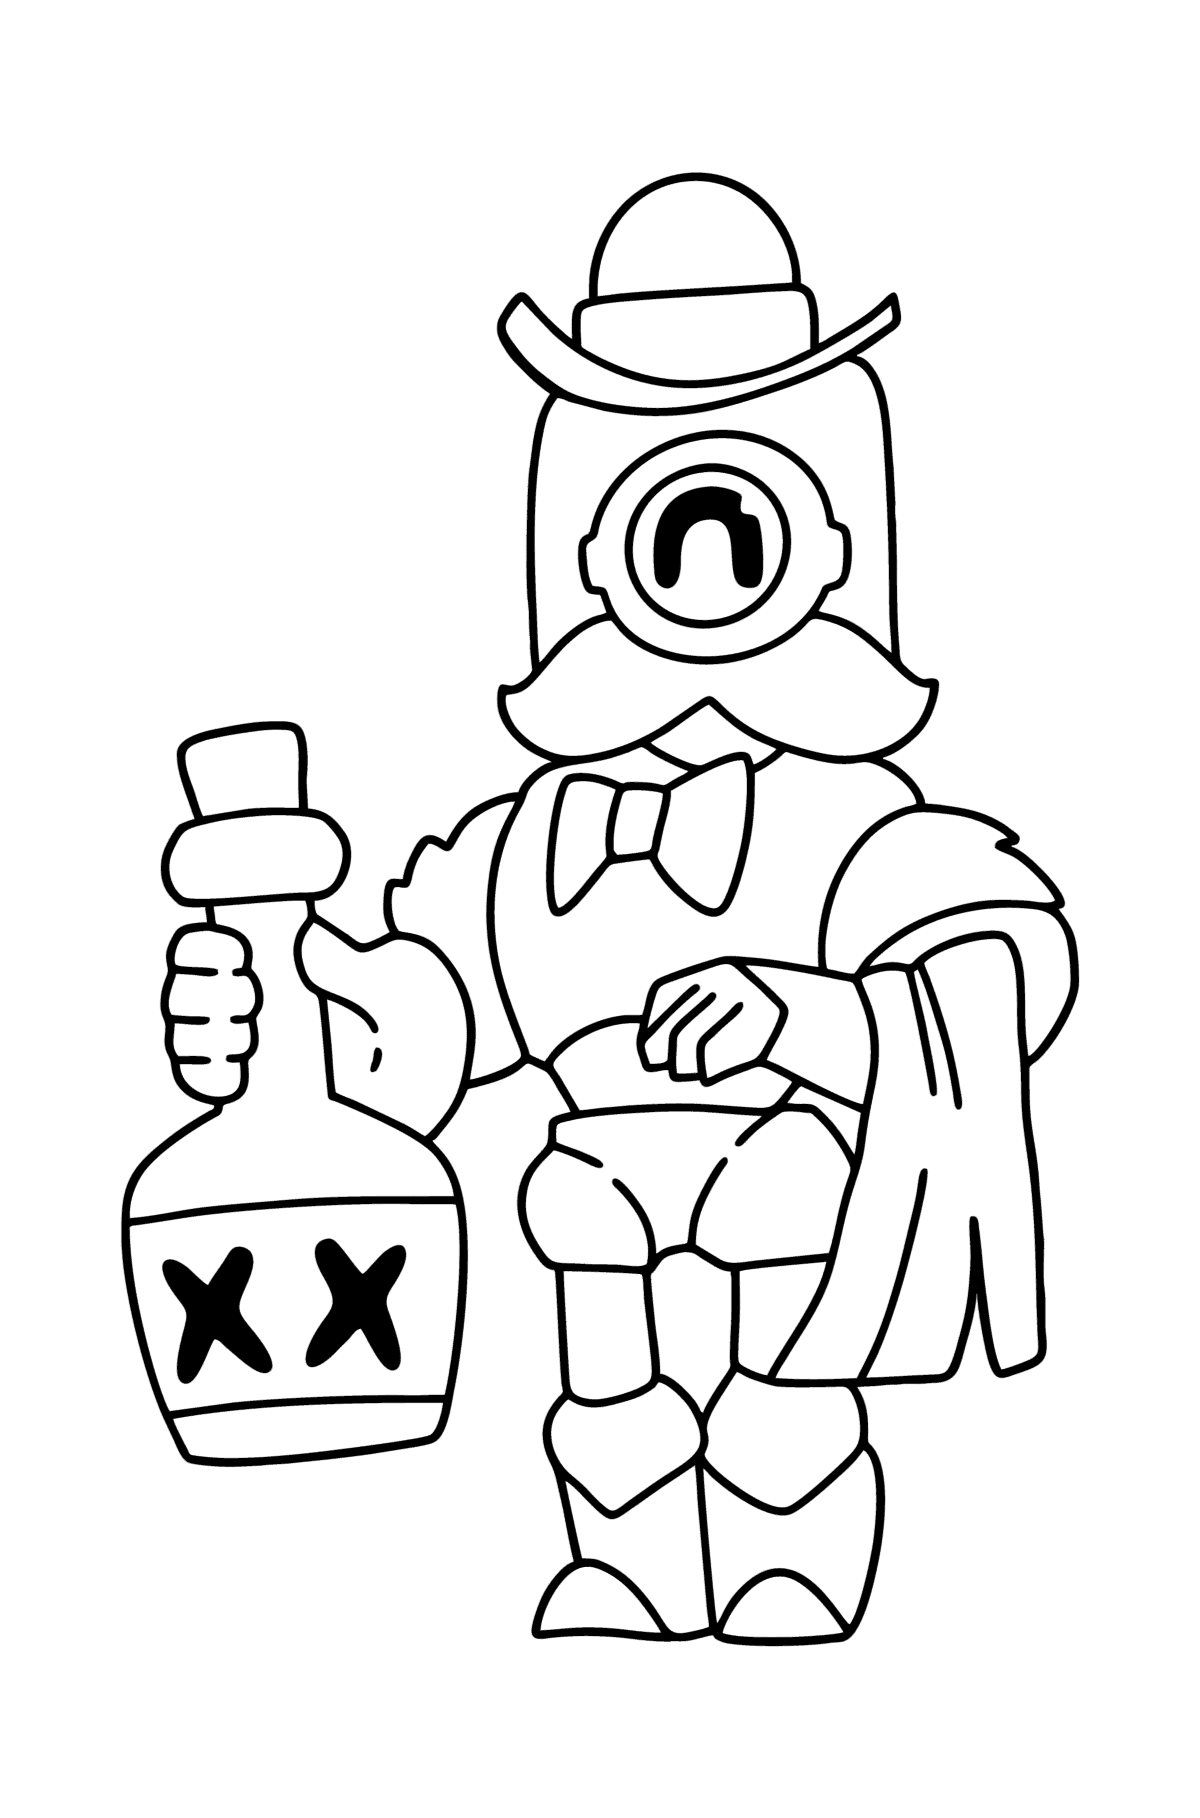 Brawl Stars Barley coloring page - Coloring Pages for Kids